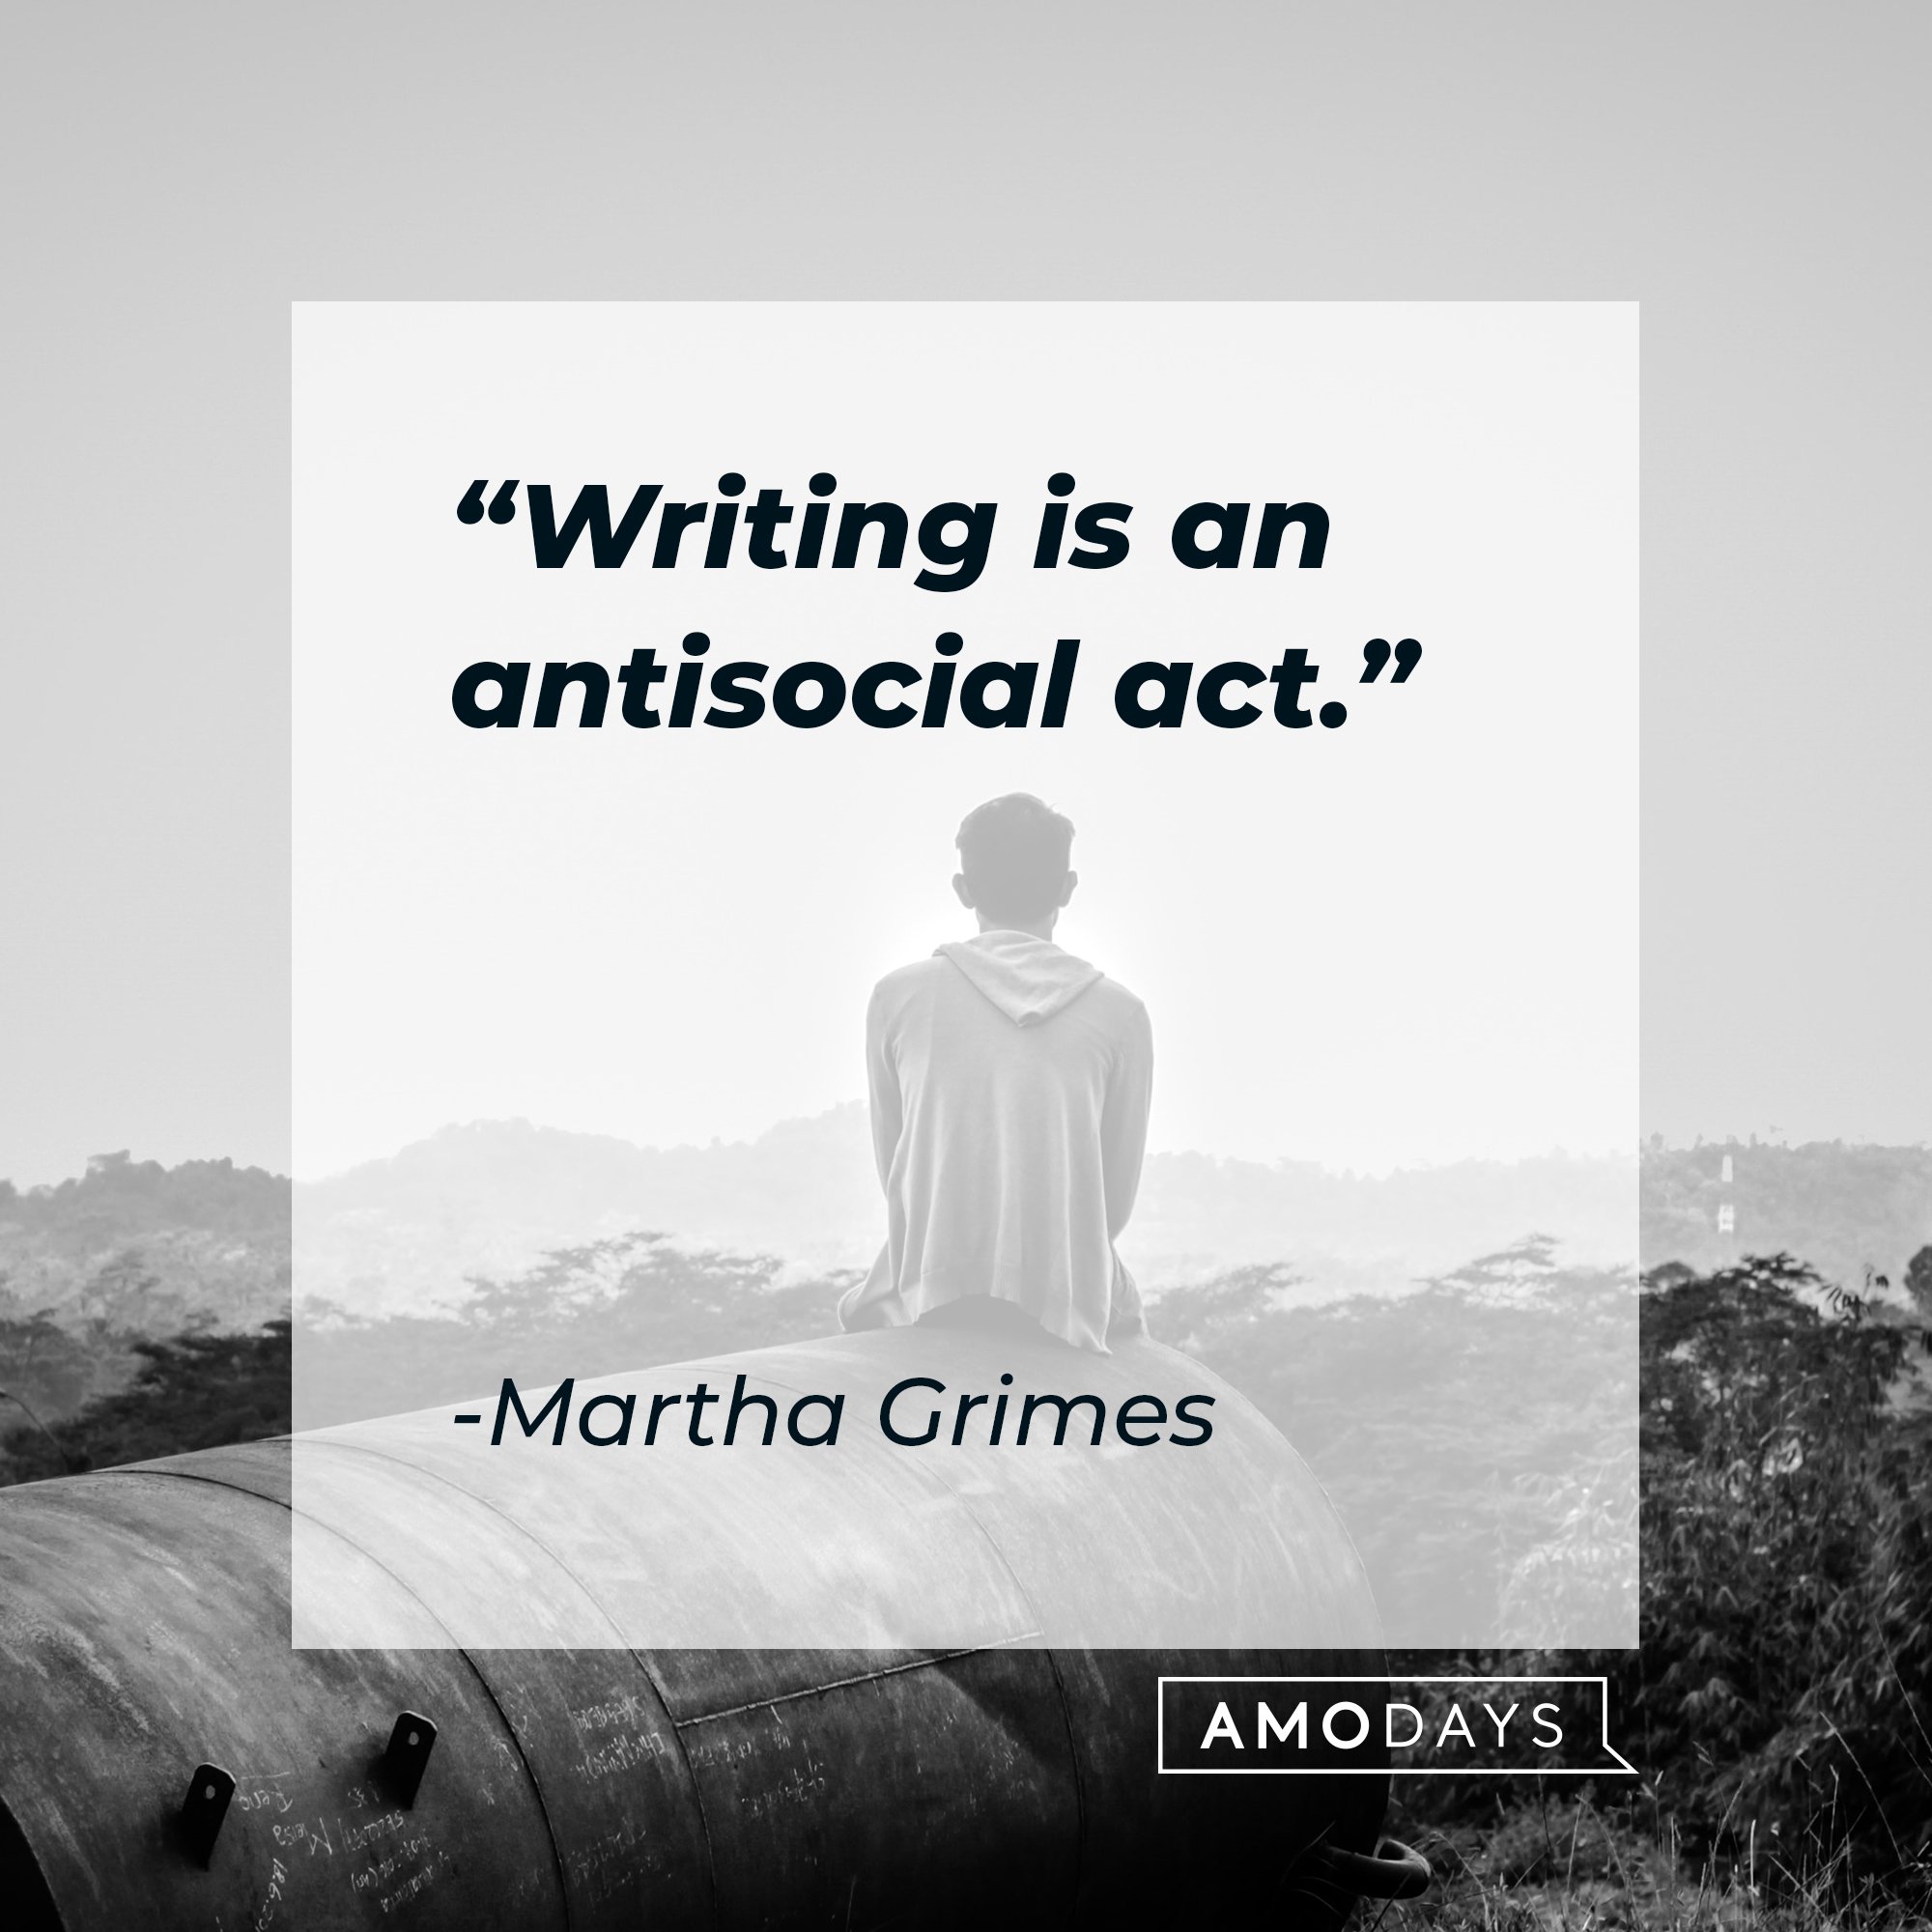 Martha Grimes’ quote: "Writing is an antisocial act." | Image: AmoDays